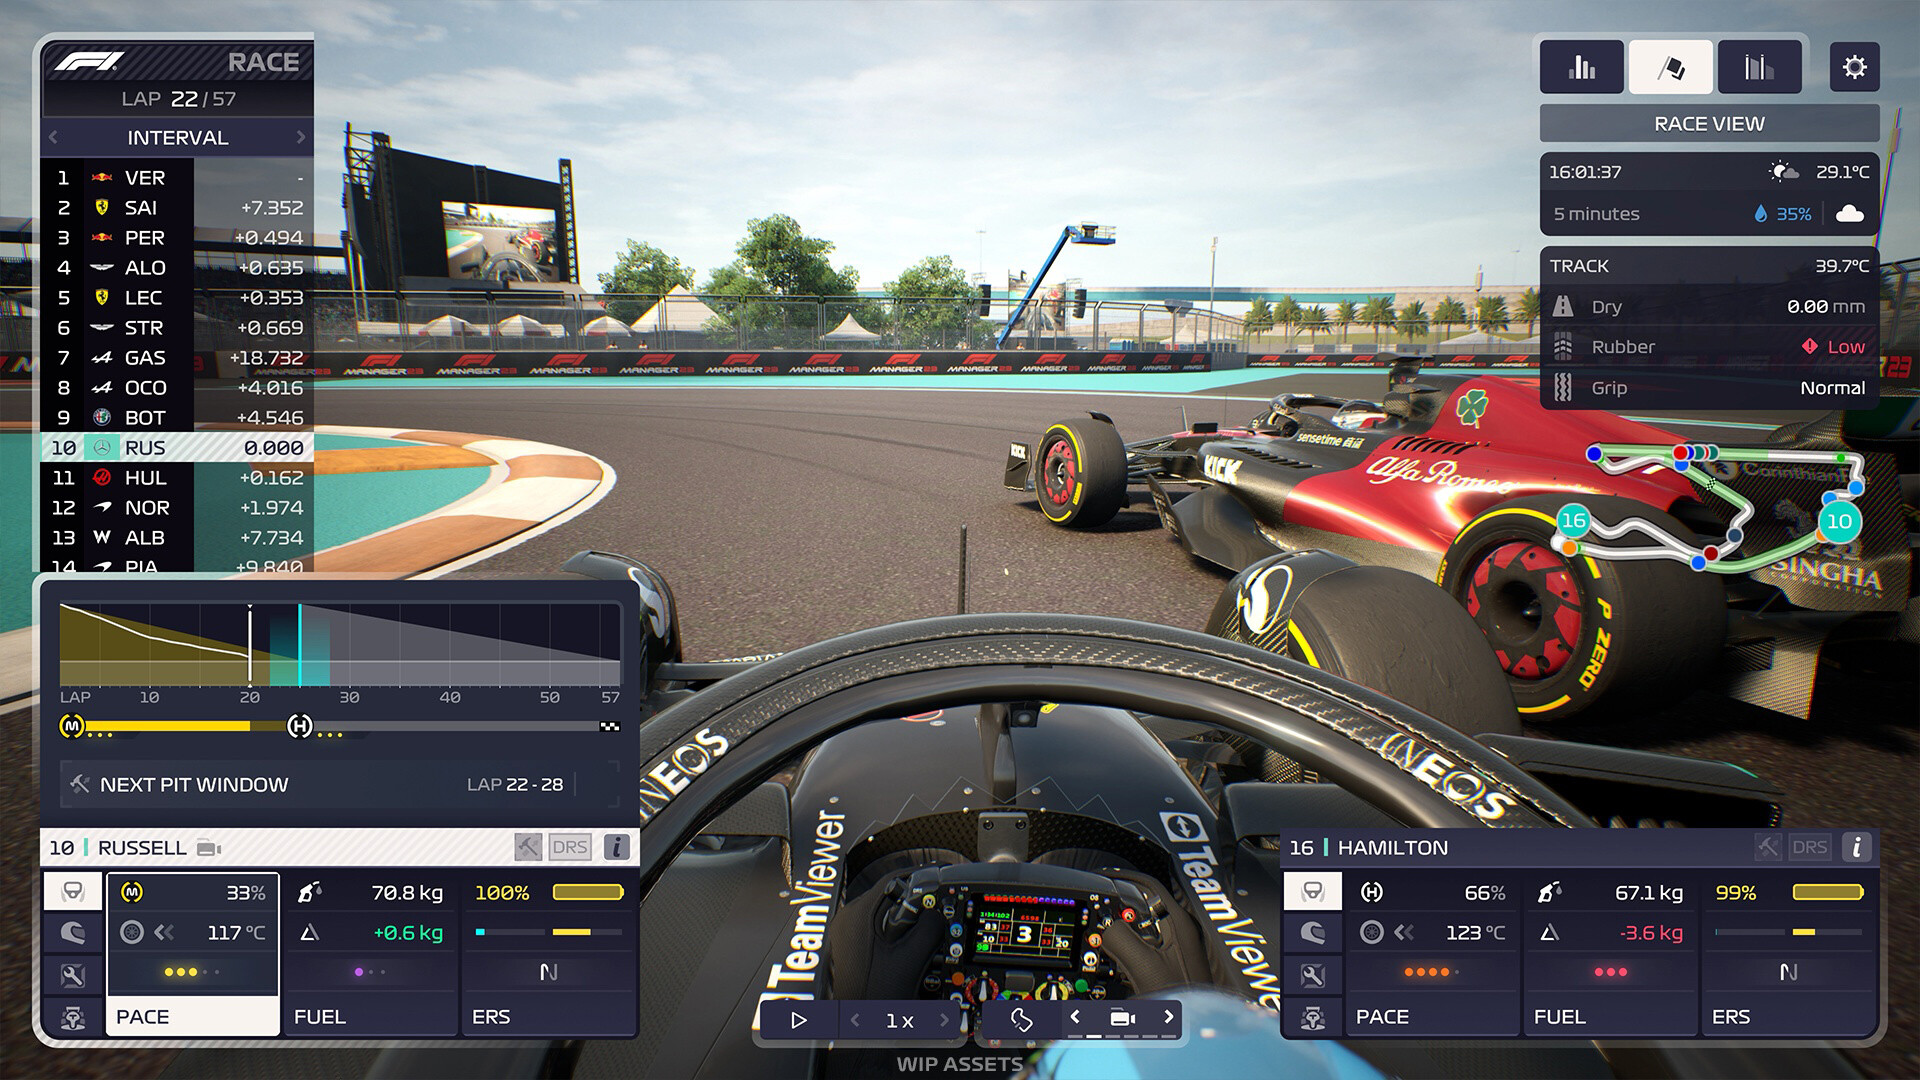 F1 Manager 2023 PlayStation 4 Account Pixelpuffin.net Activation Link